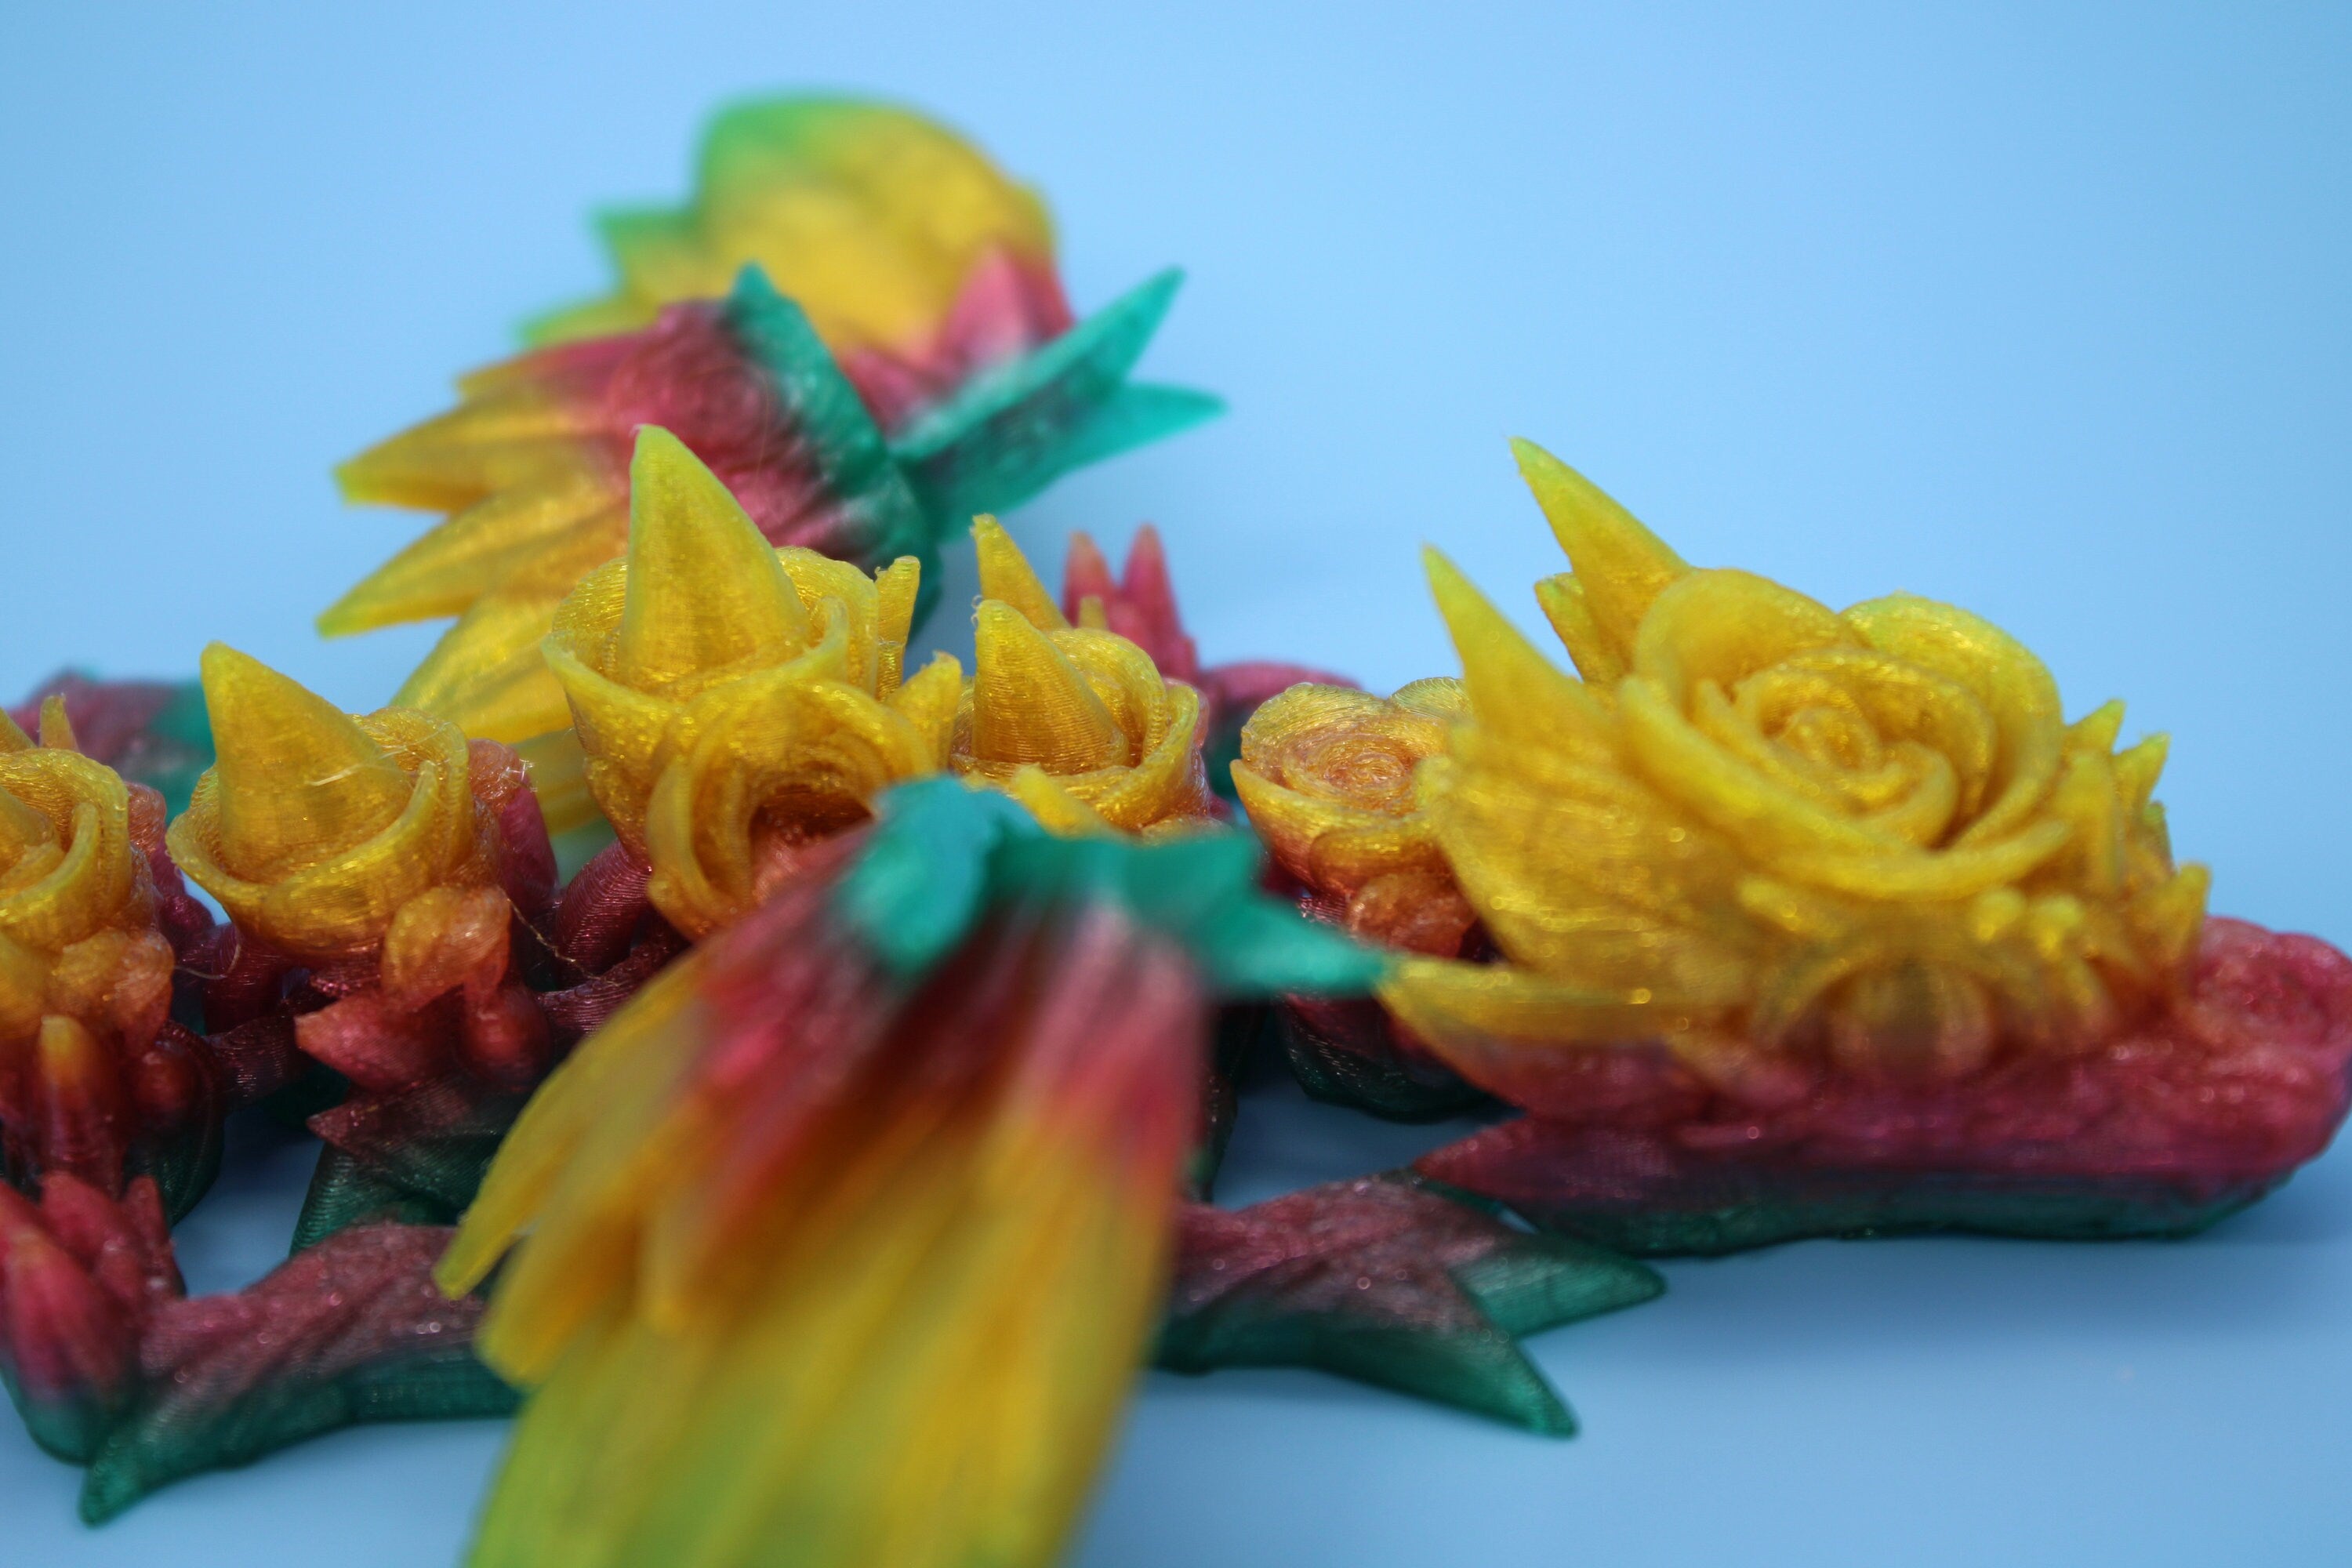 Baby Rose Wing Dragon | Rainbow | 3D Printed TPU | Fidget | Flexi Toy 8.5 in. | Stress Relief Gift